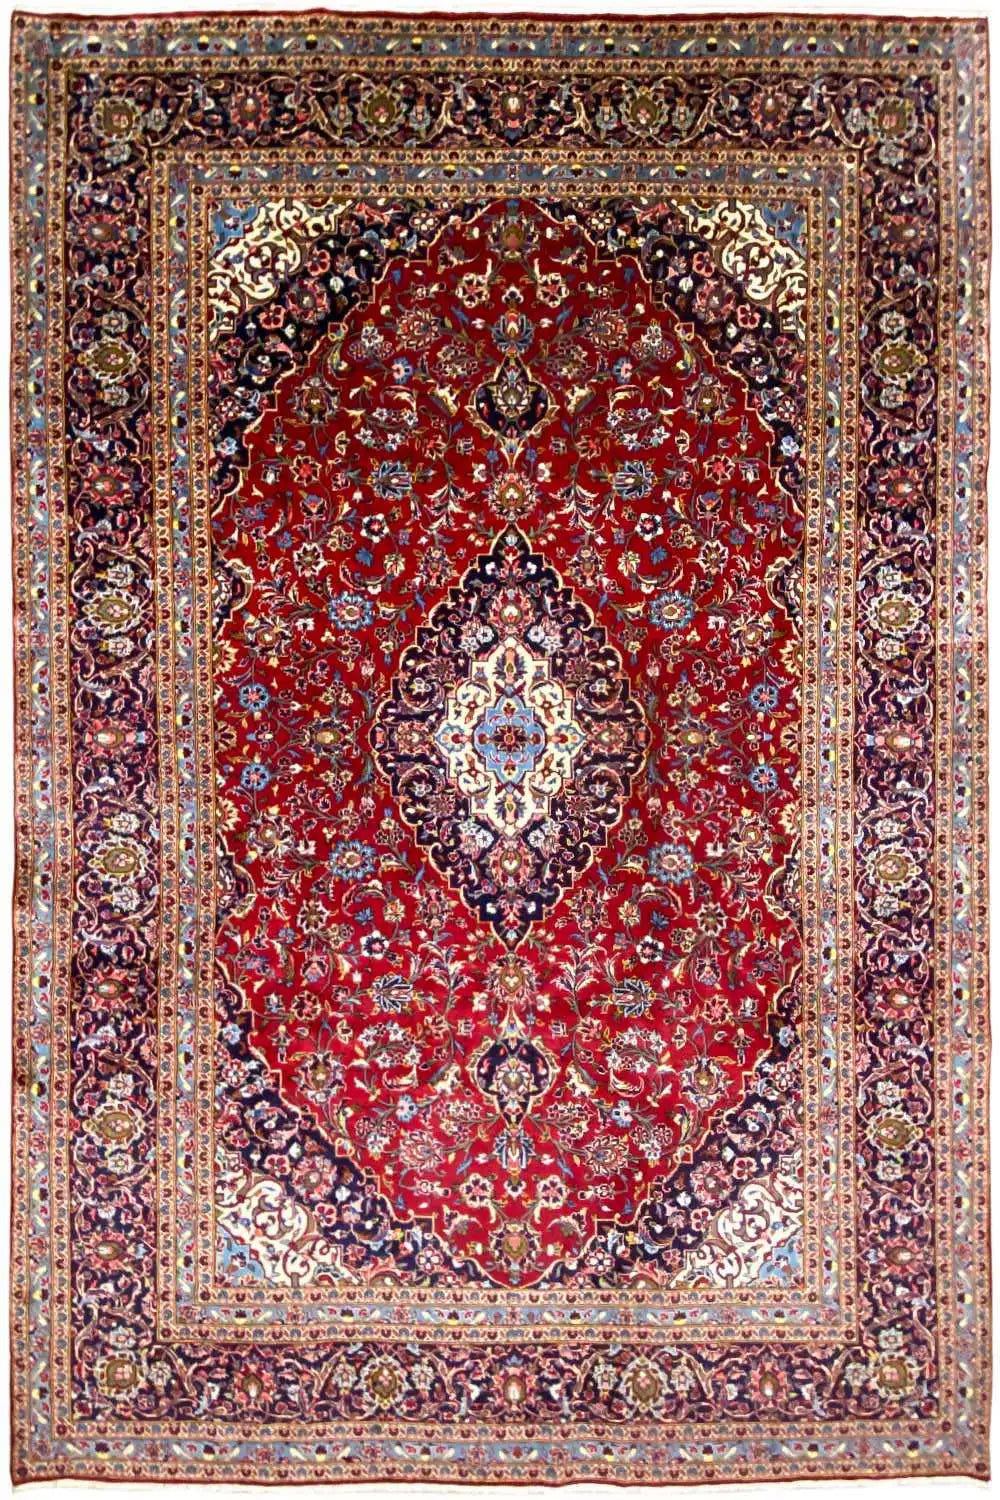 A beautiful Keshan rug in Red and yellow color representing a medallion and  string of flowers.